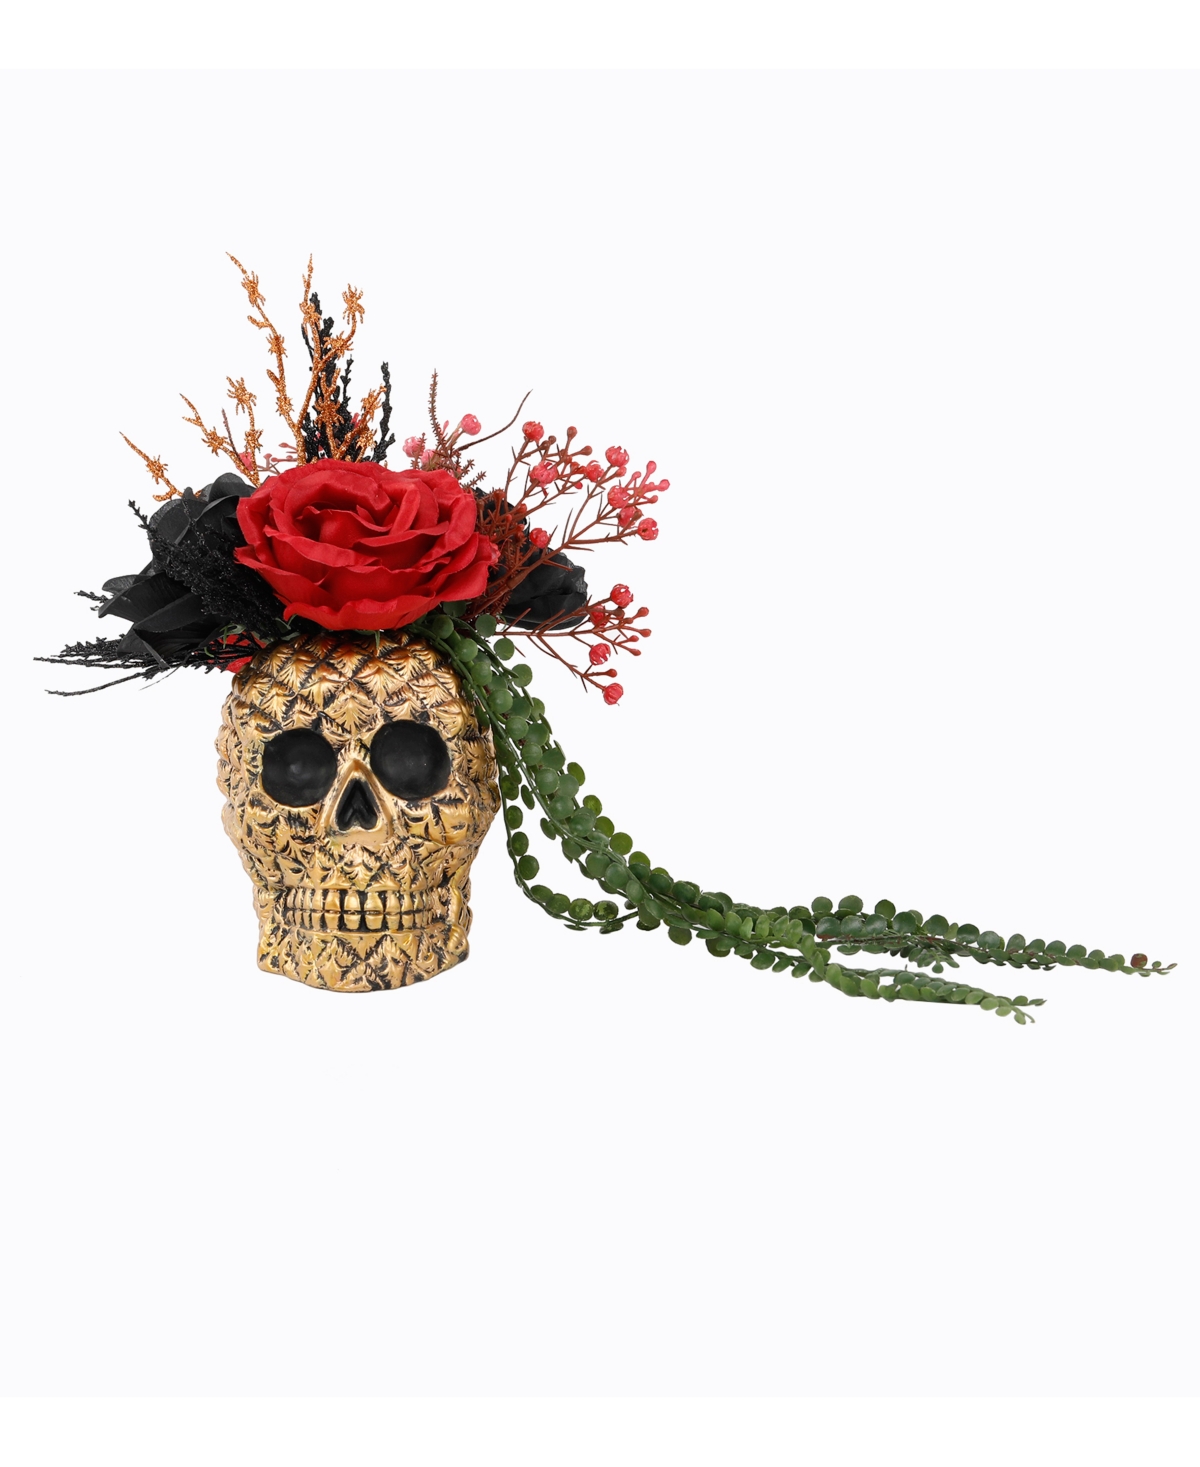 Halloween Floral Arrangement with Rose String of Pearls in Ceramic Skull, 6.25" - Gold-Tone, Green